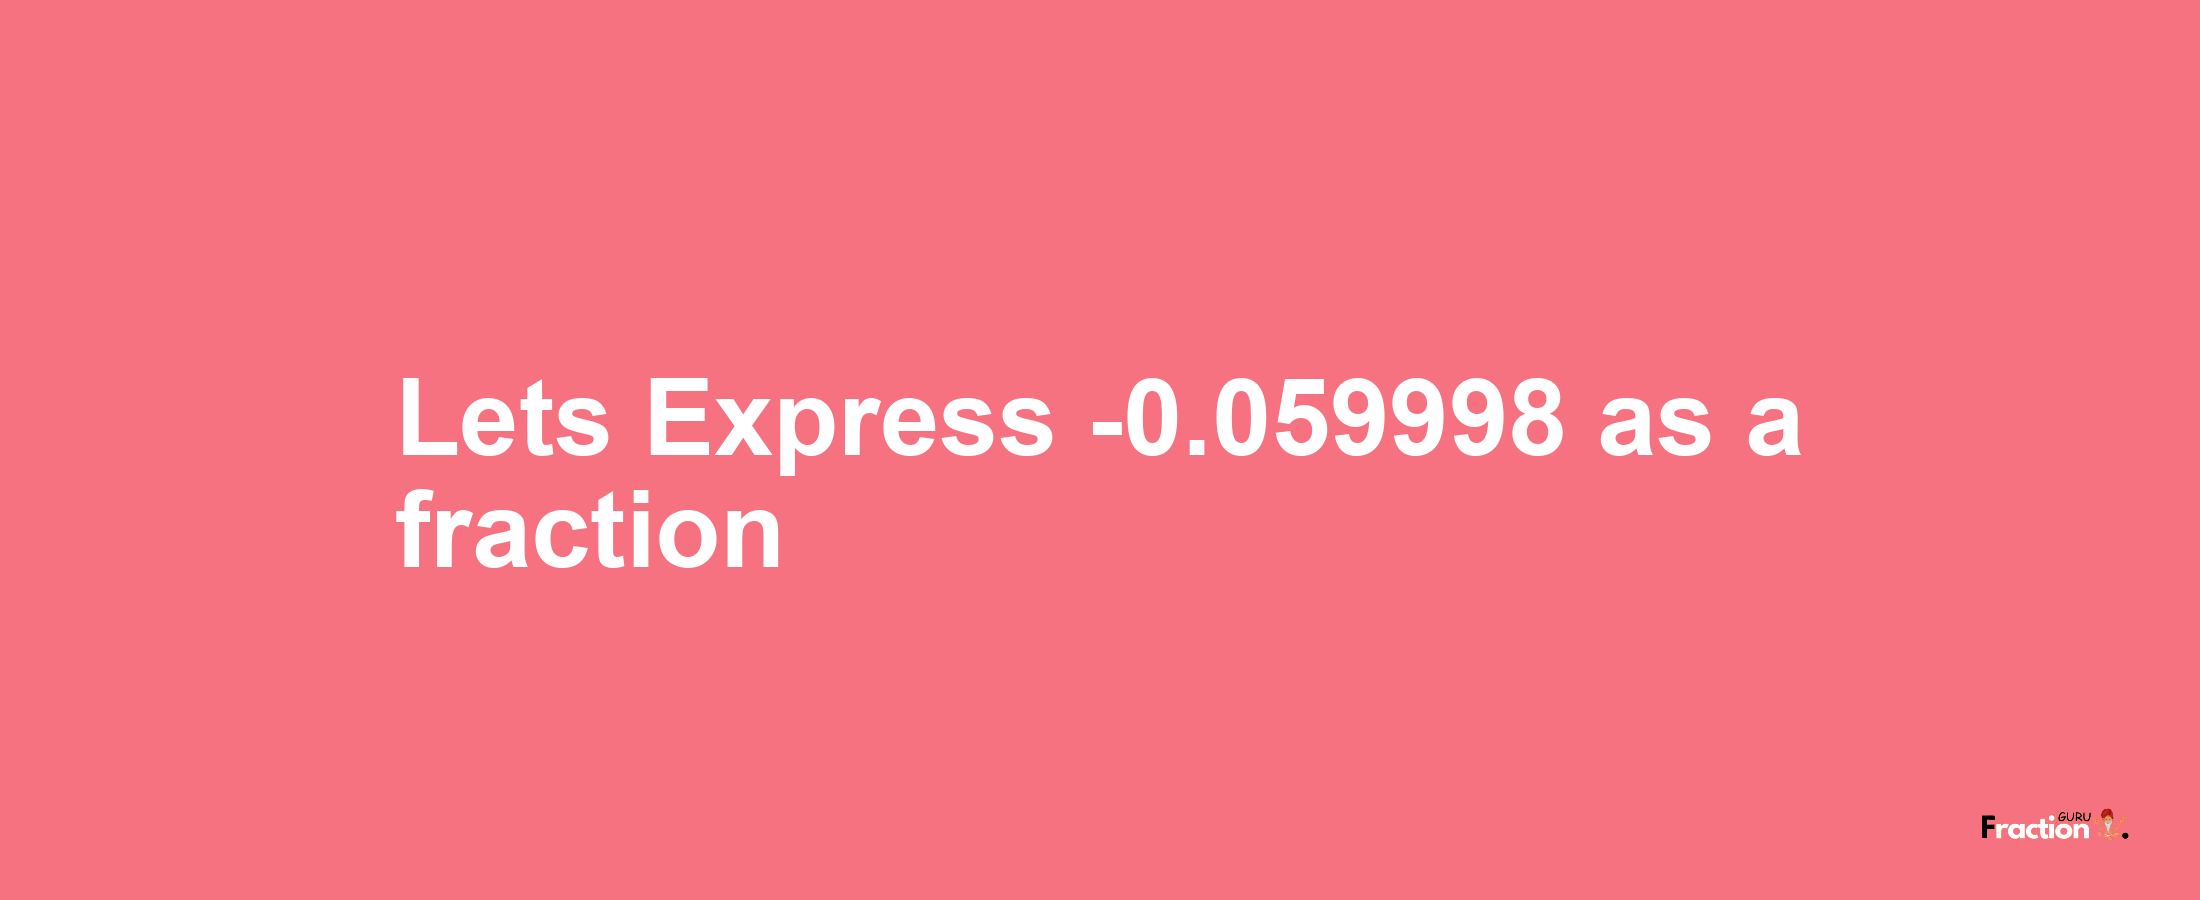 Lets Express -0.059998 as afraction